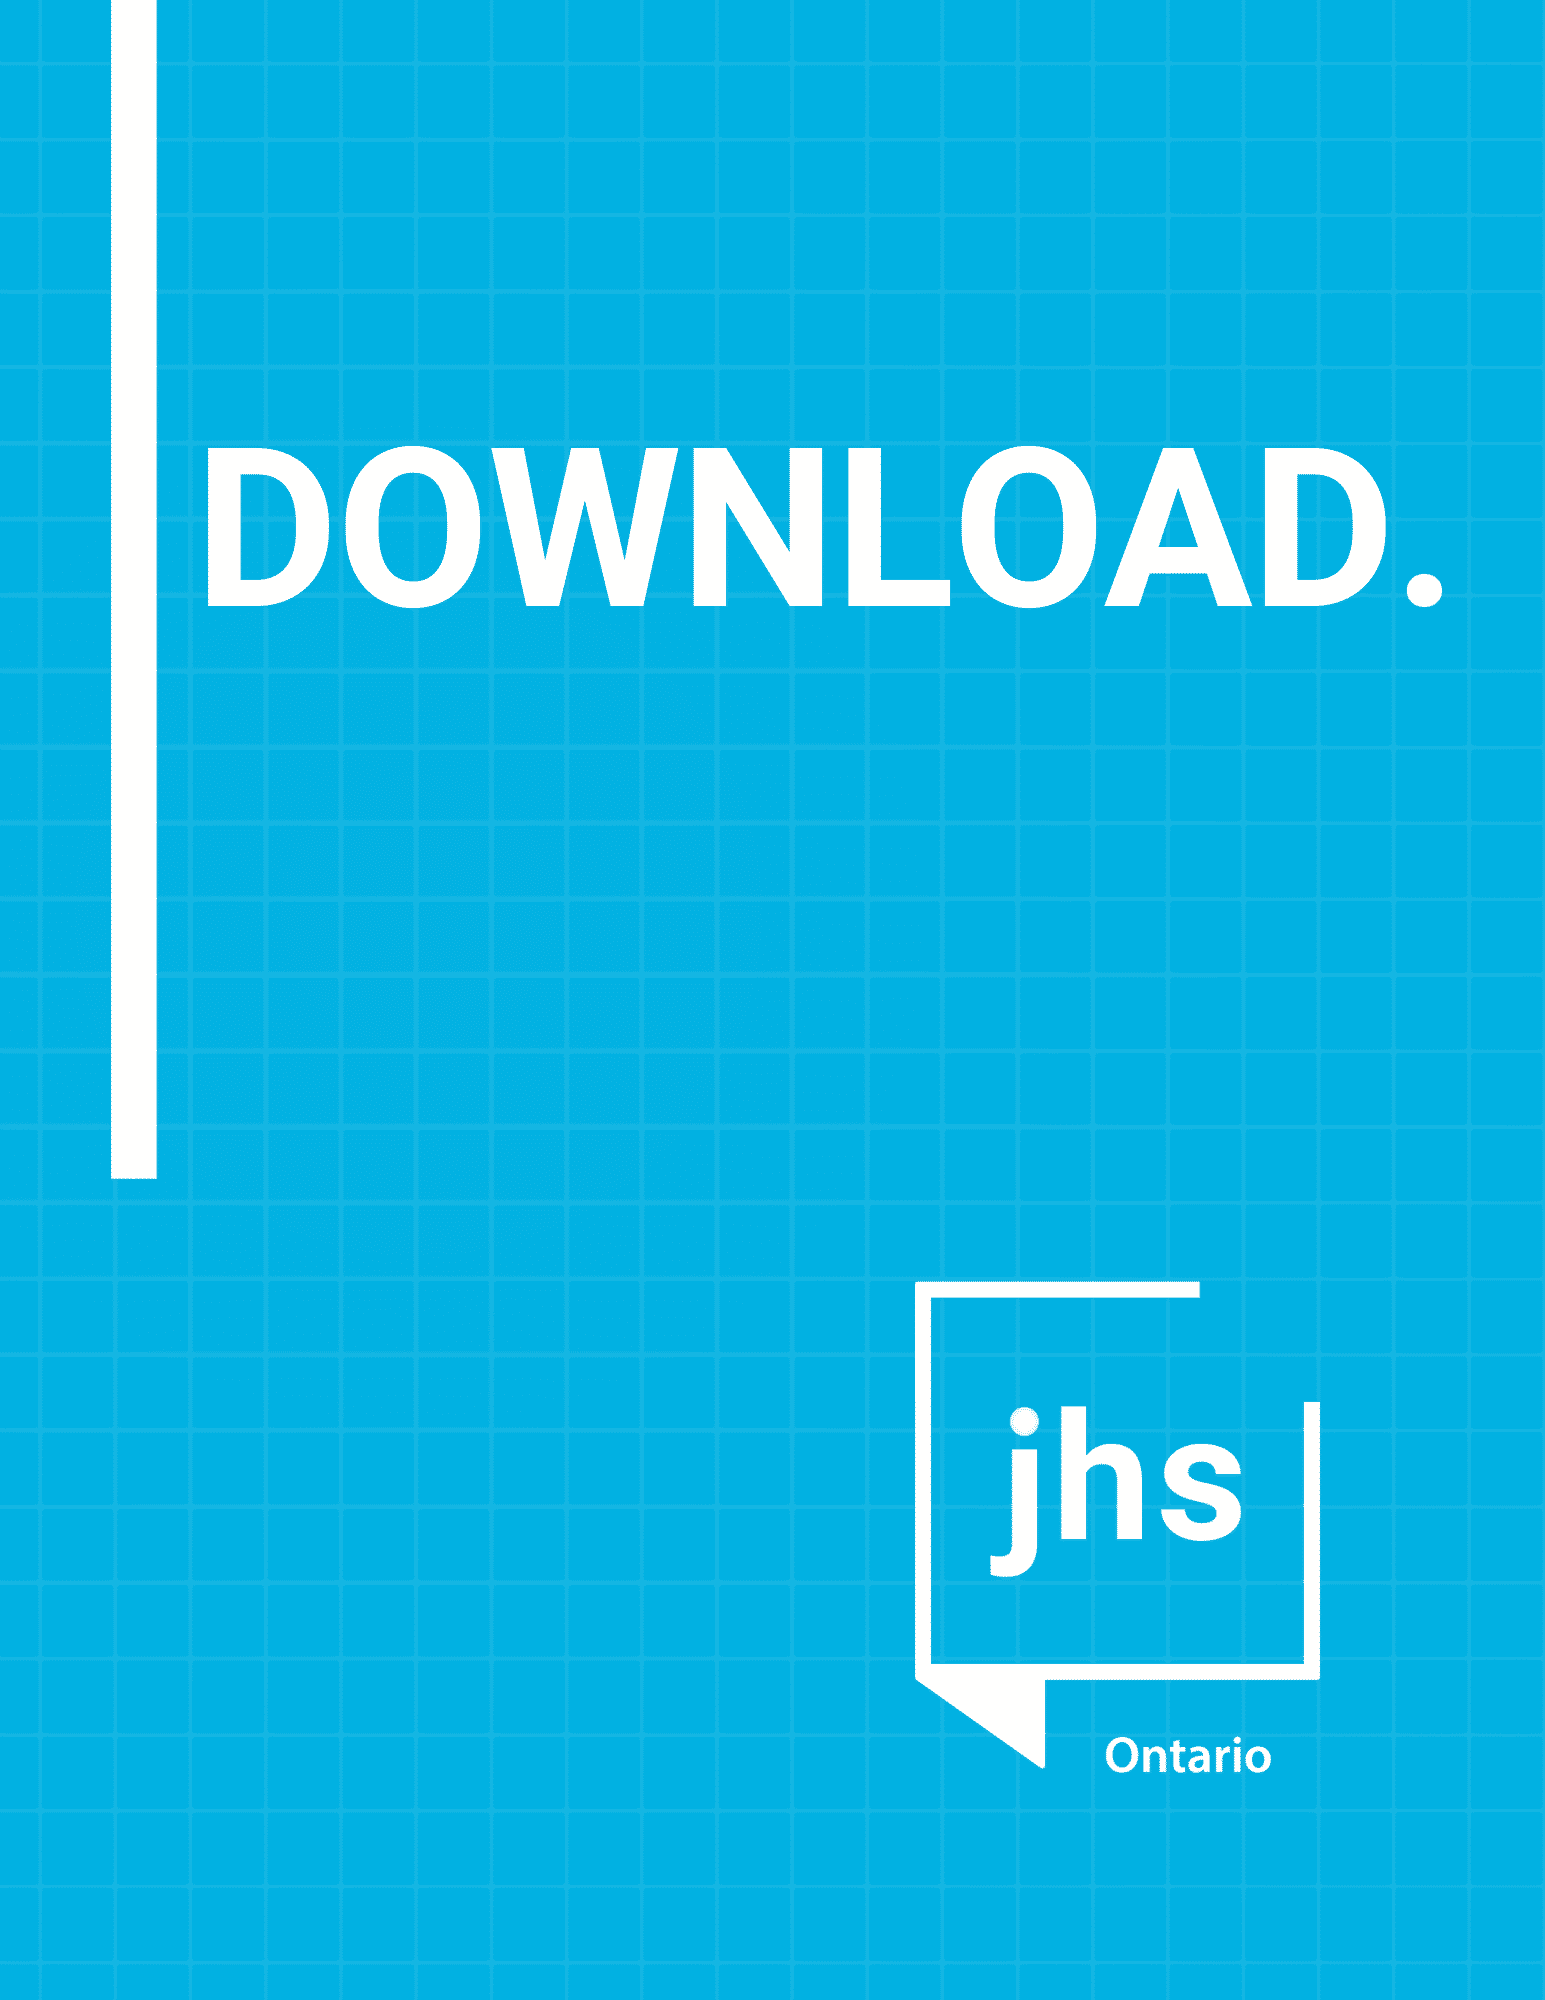 Cover page with blue background and "Download" text